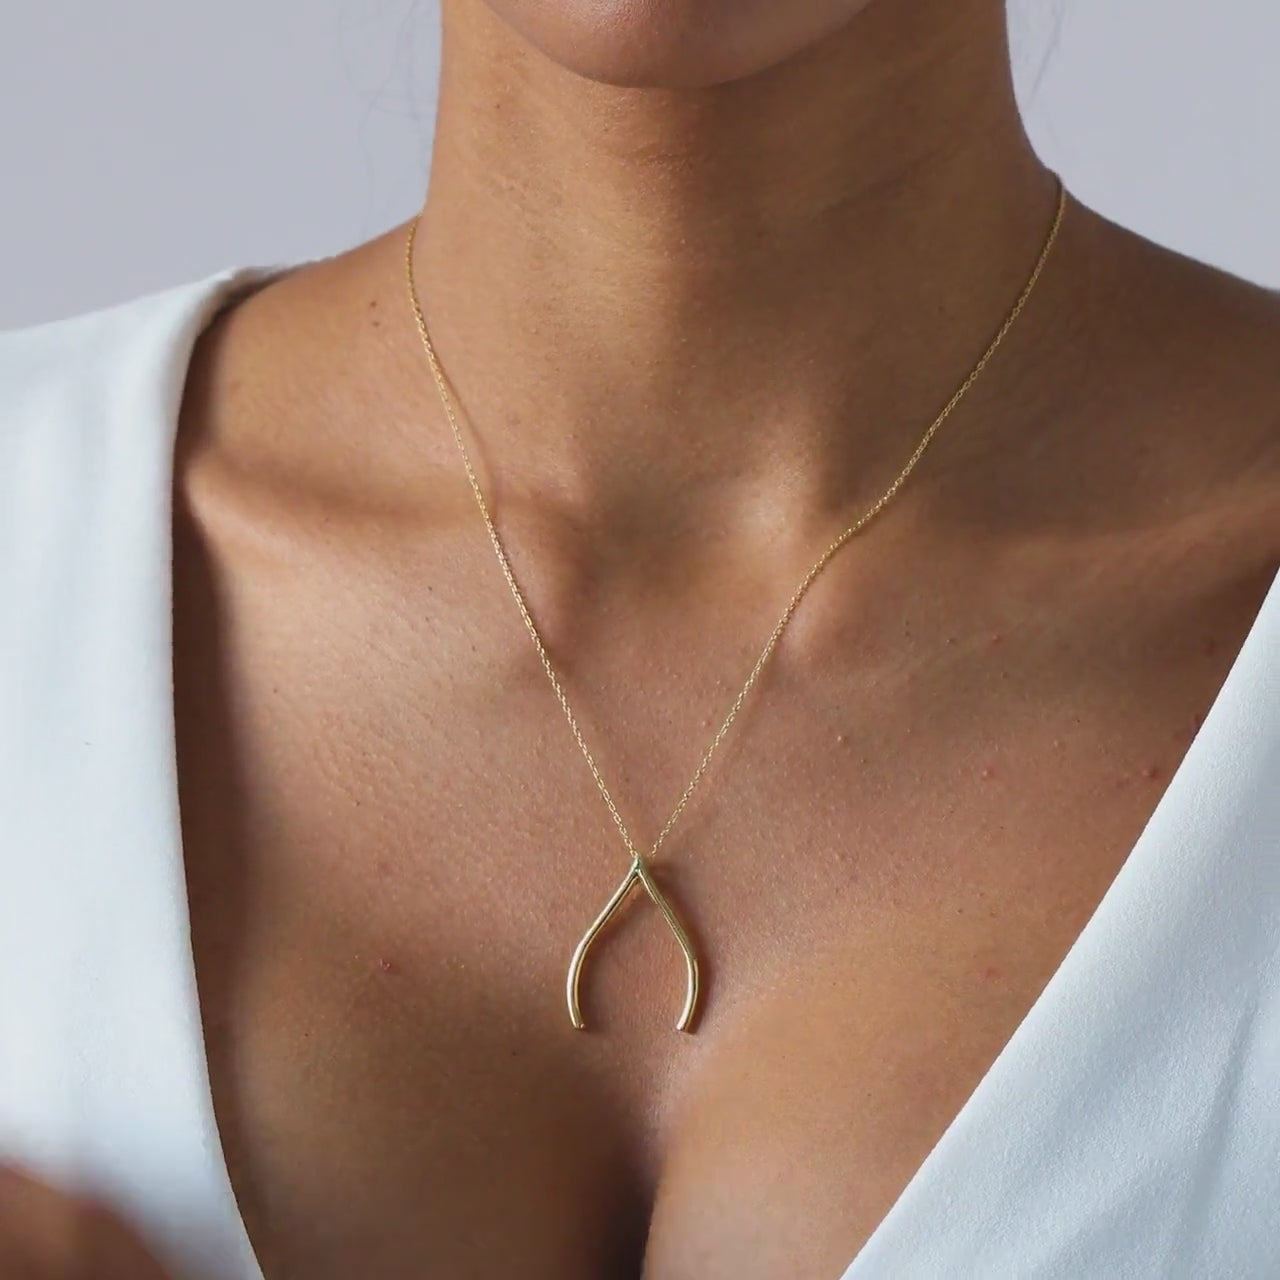 The Scallop Ring Holder Necklace | Ring holder necklace, Wedding ring  necklace holder, Necklace